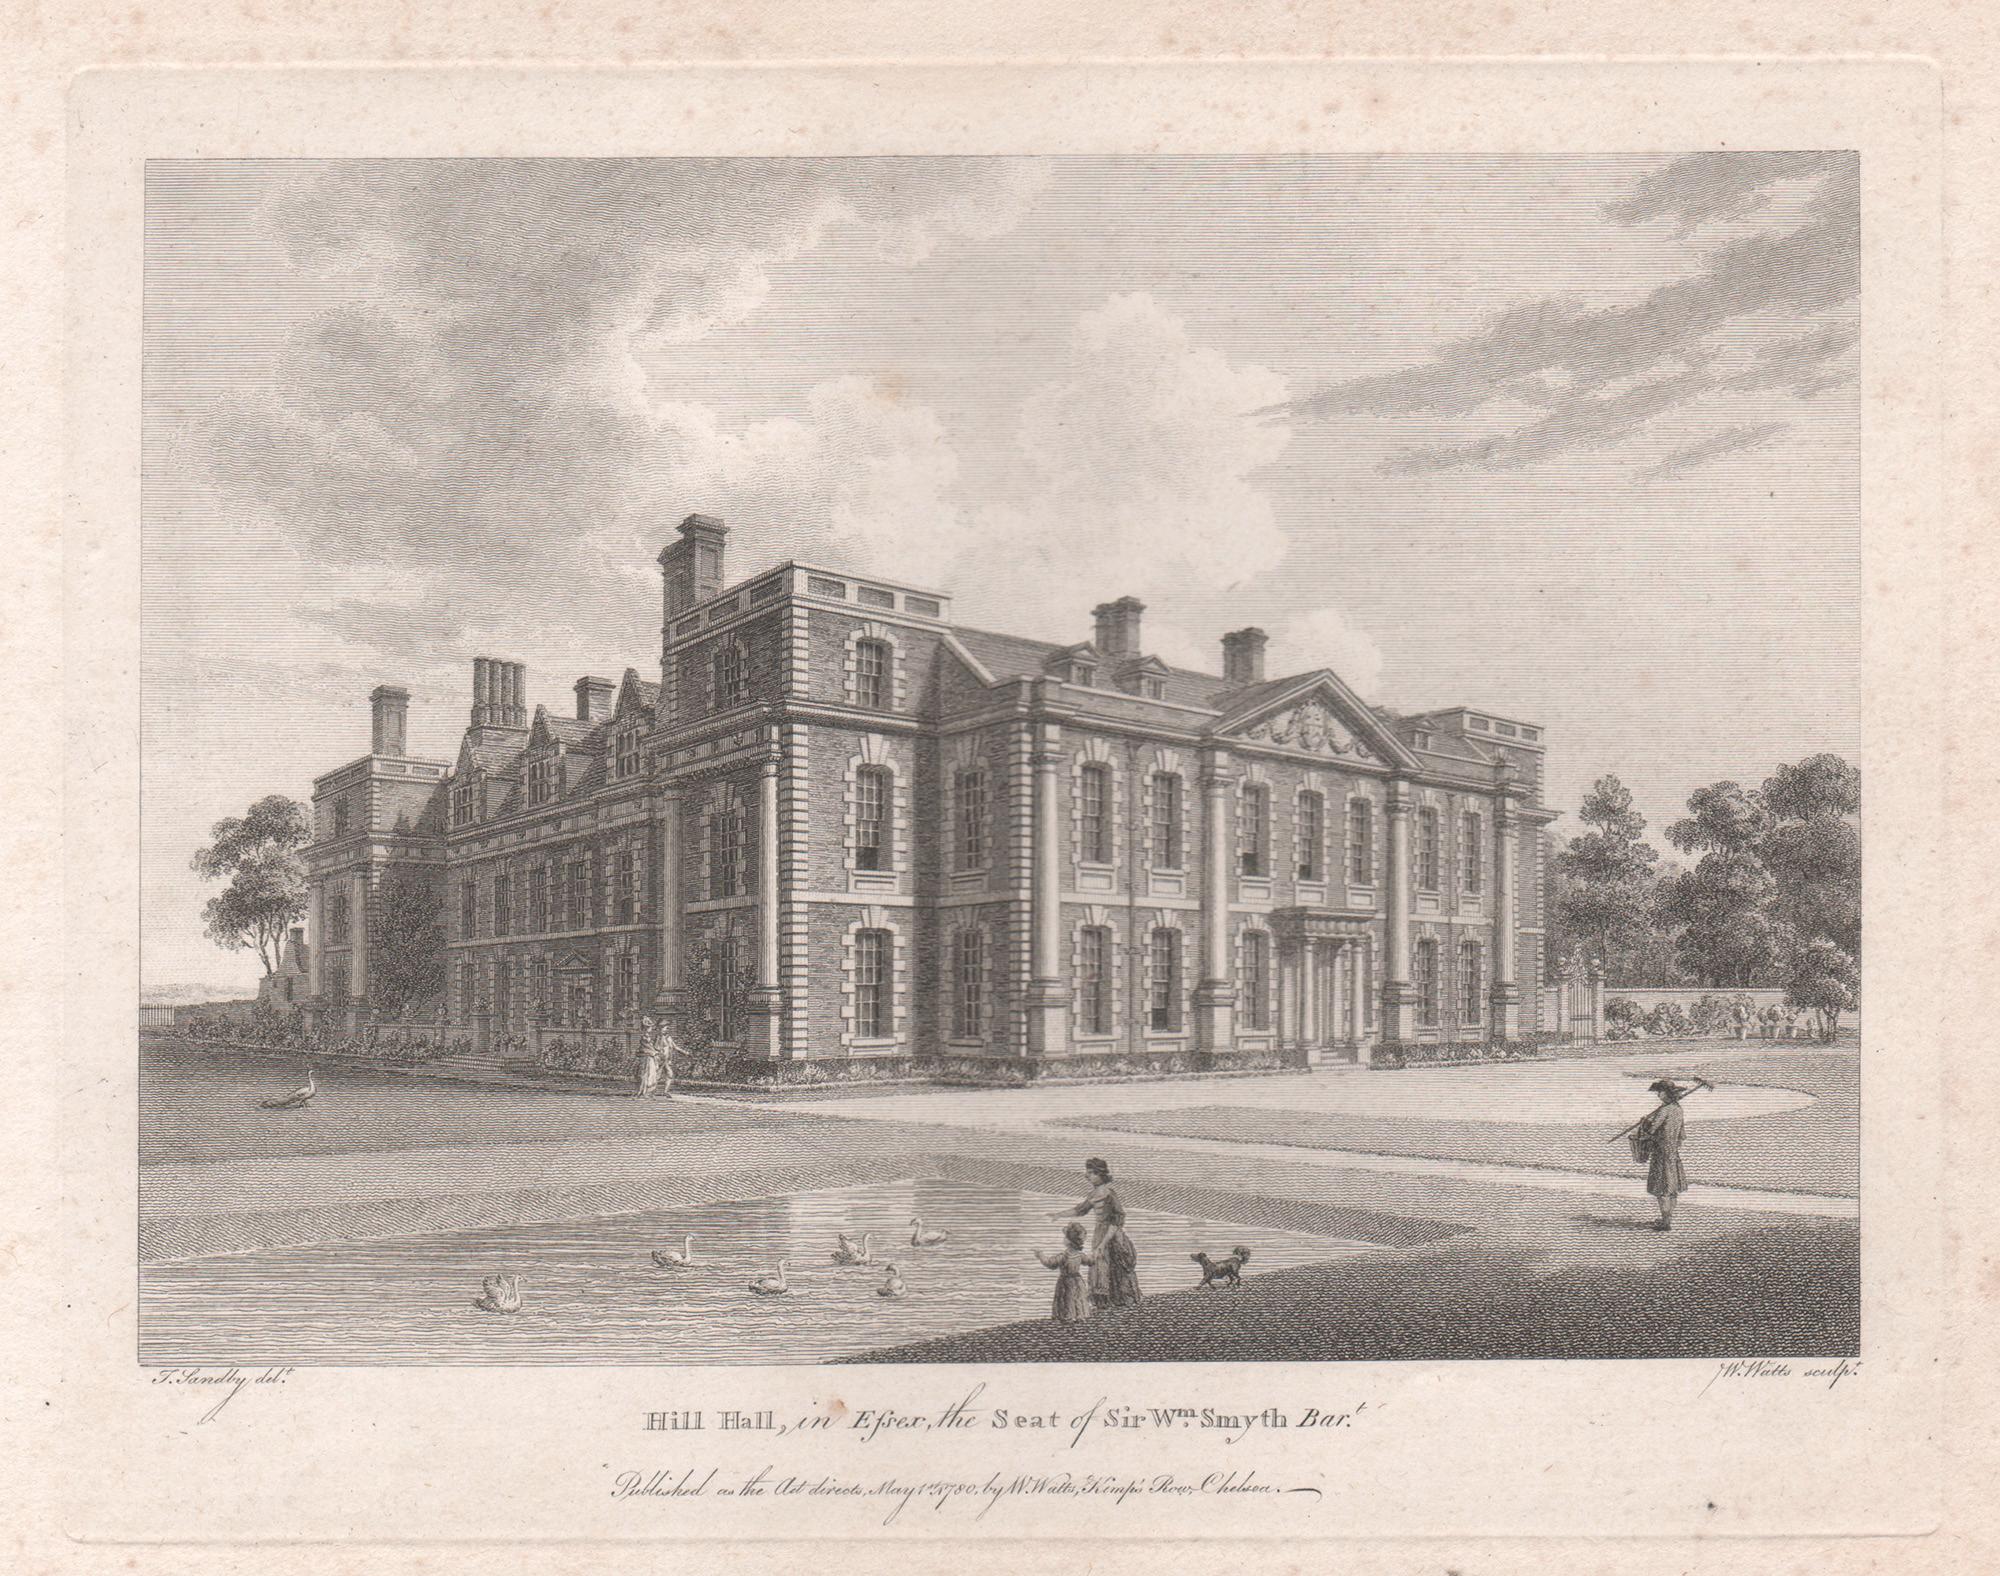 William Watts Landscape Print - Hill Hall in Essex, 18th century English country house engraving, 1780